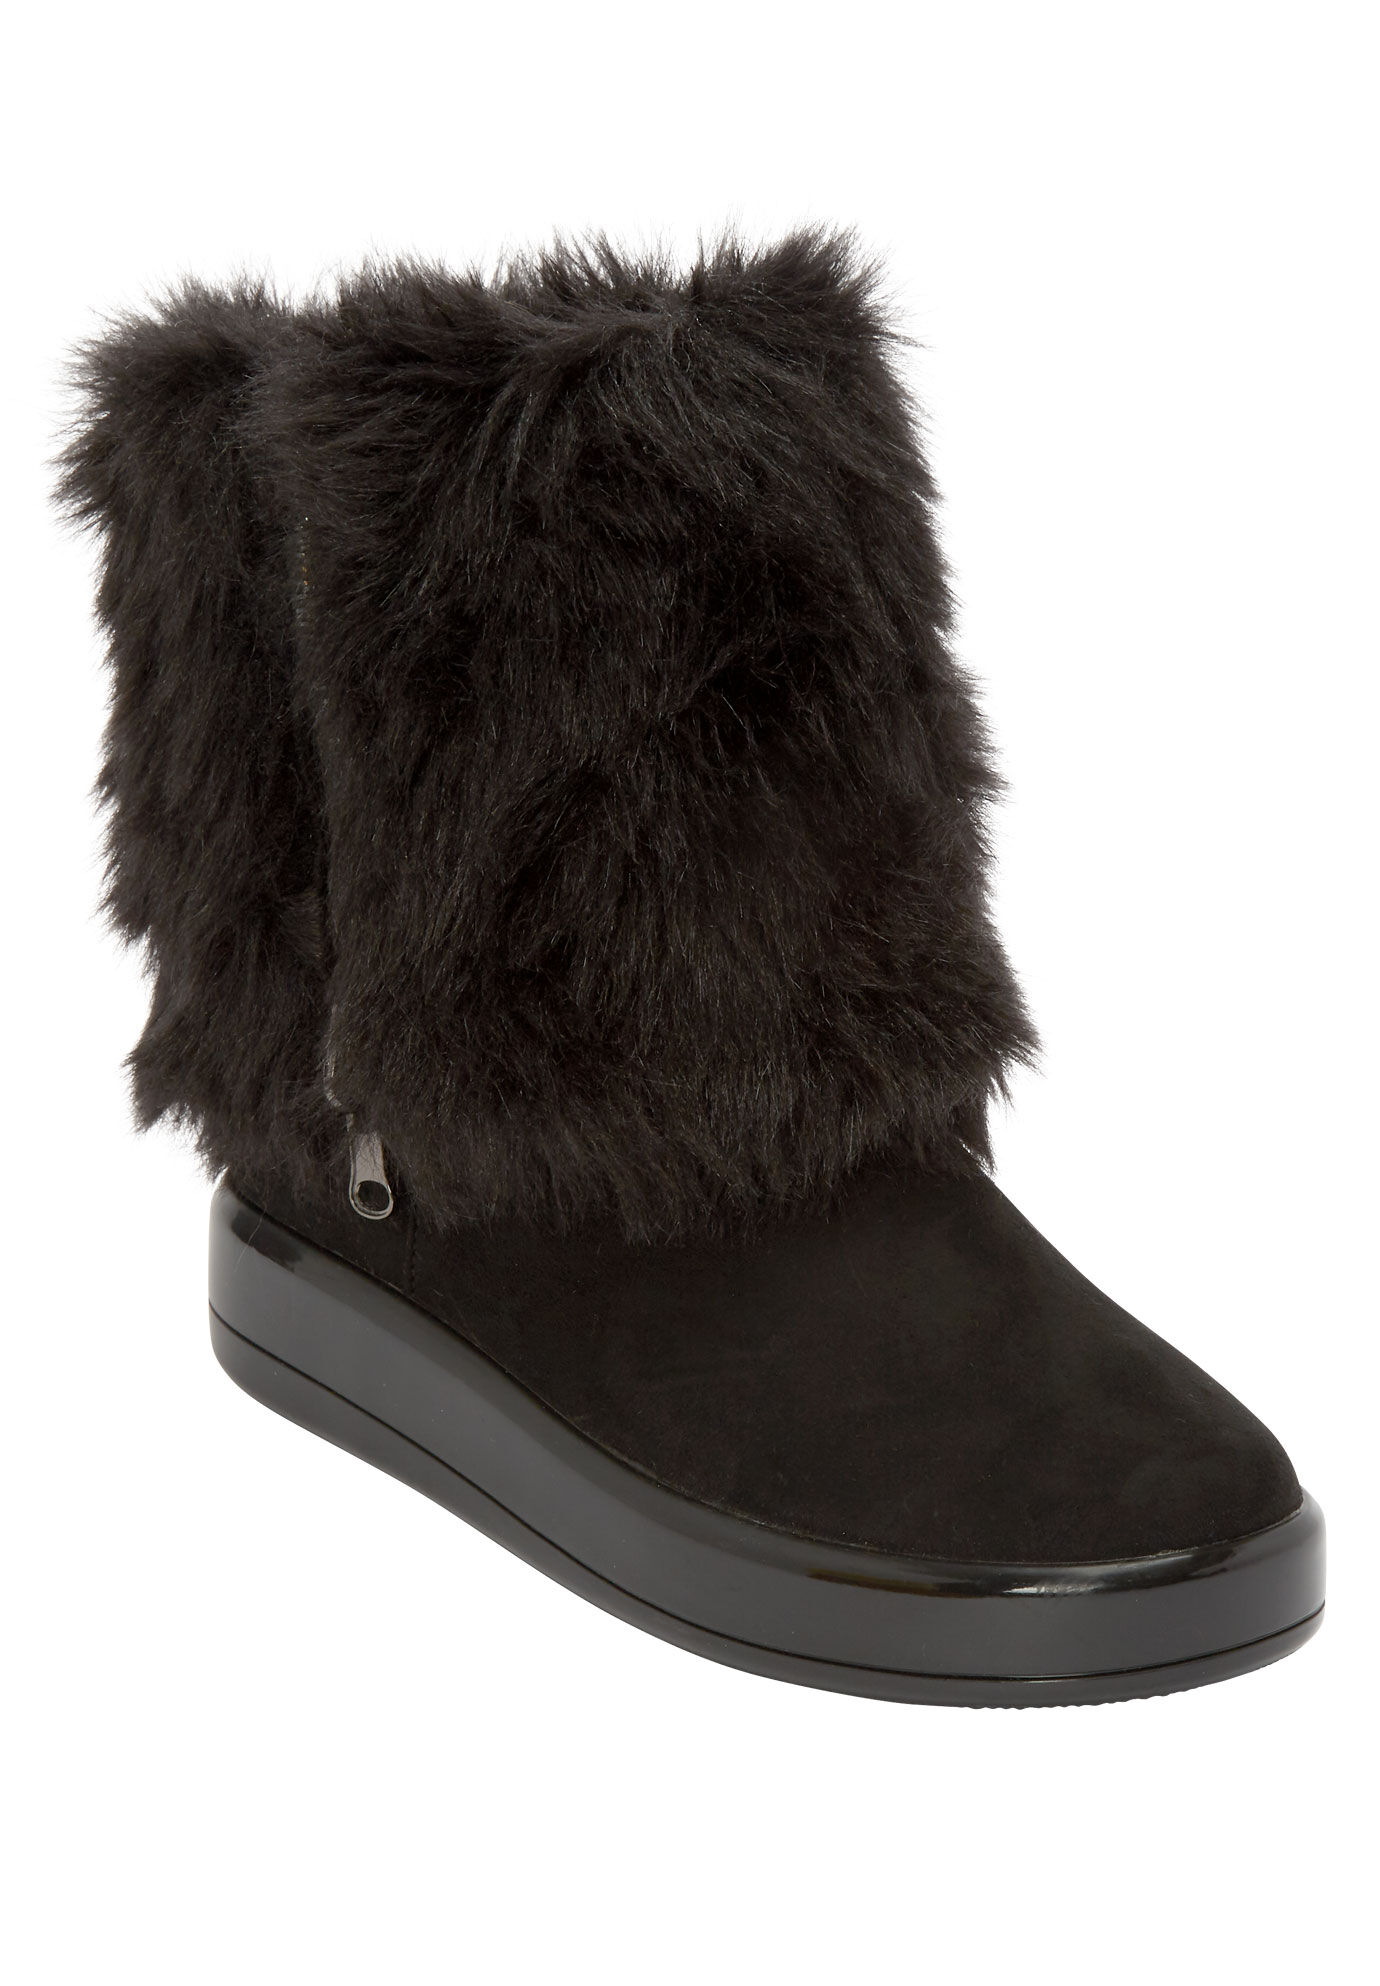 womens wide calf snow boots